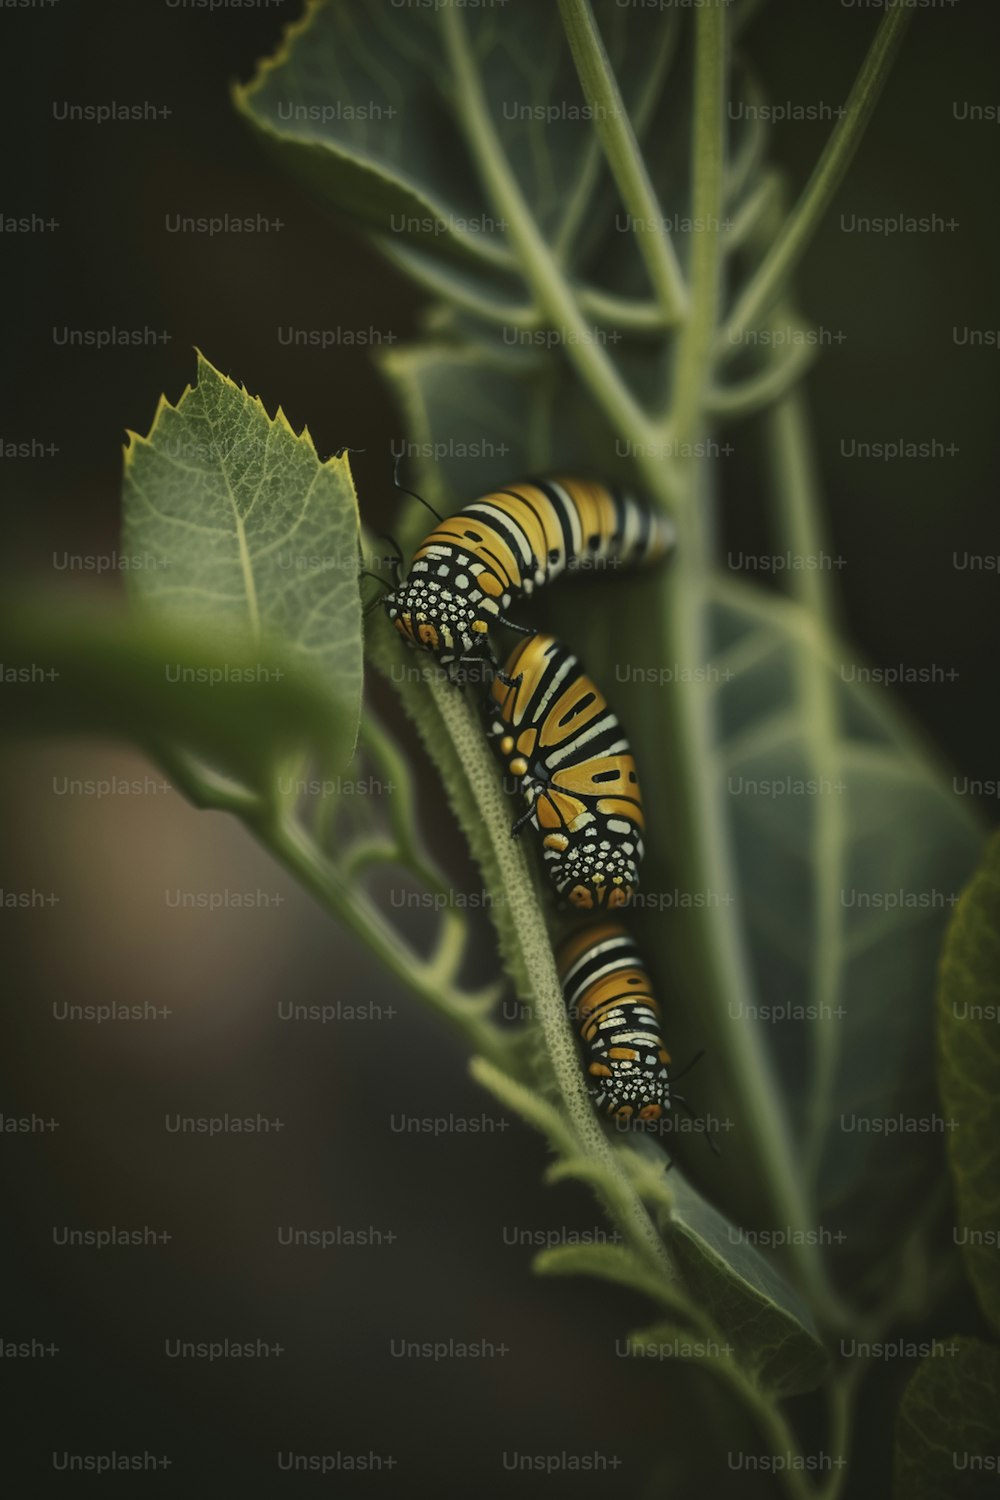 a close up of a caterpillar on a leaf